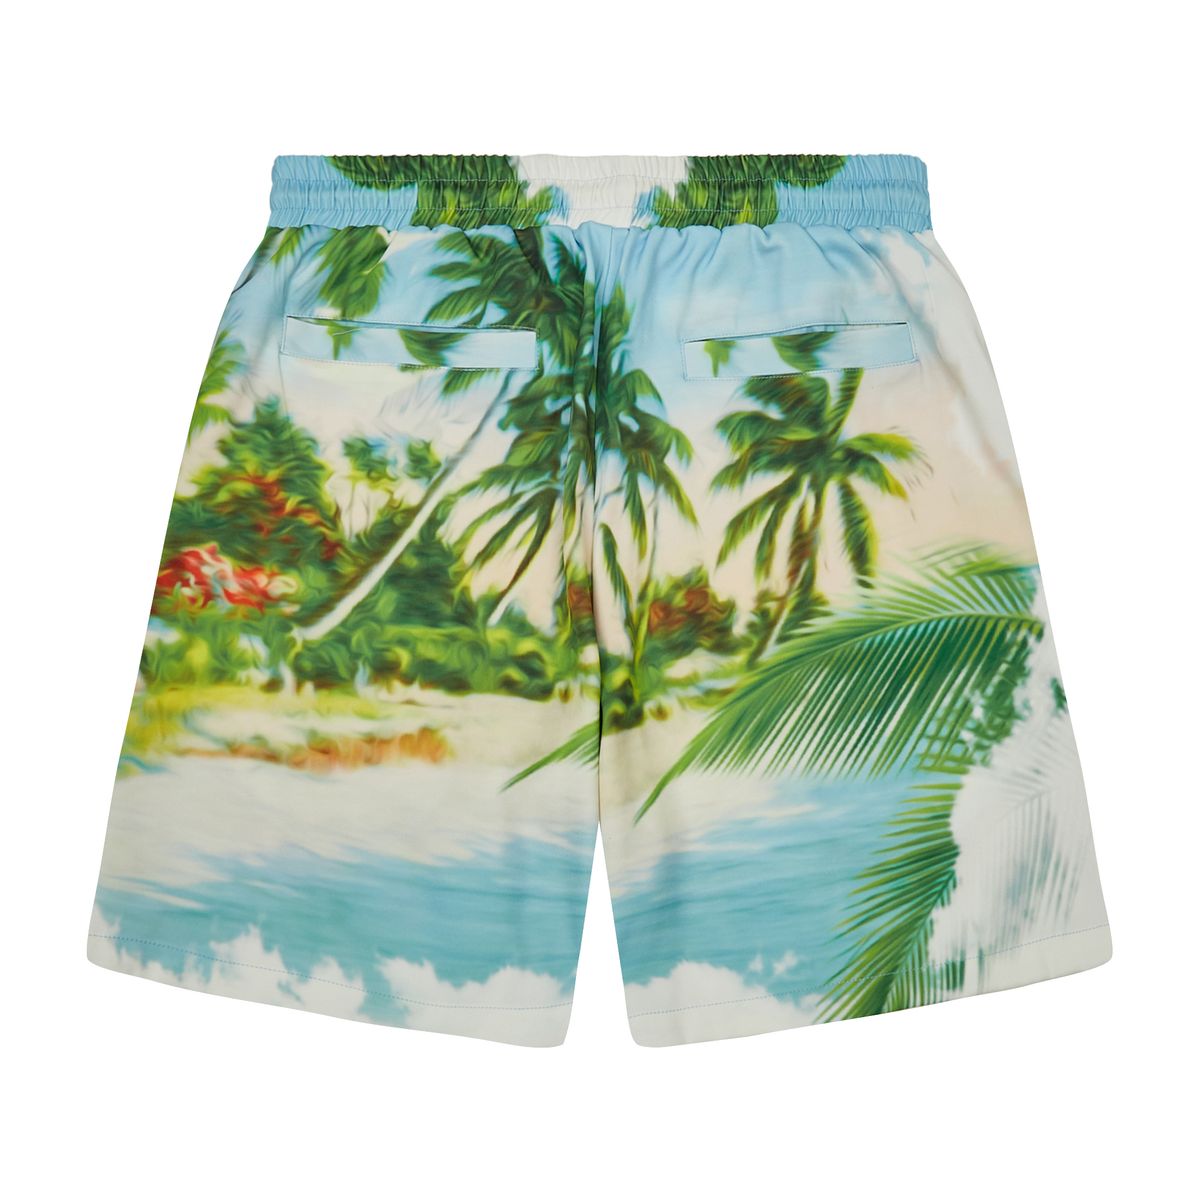 Almost Someday "PARADISE SHORTS"